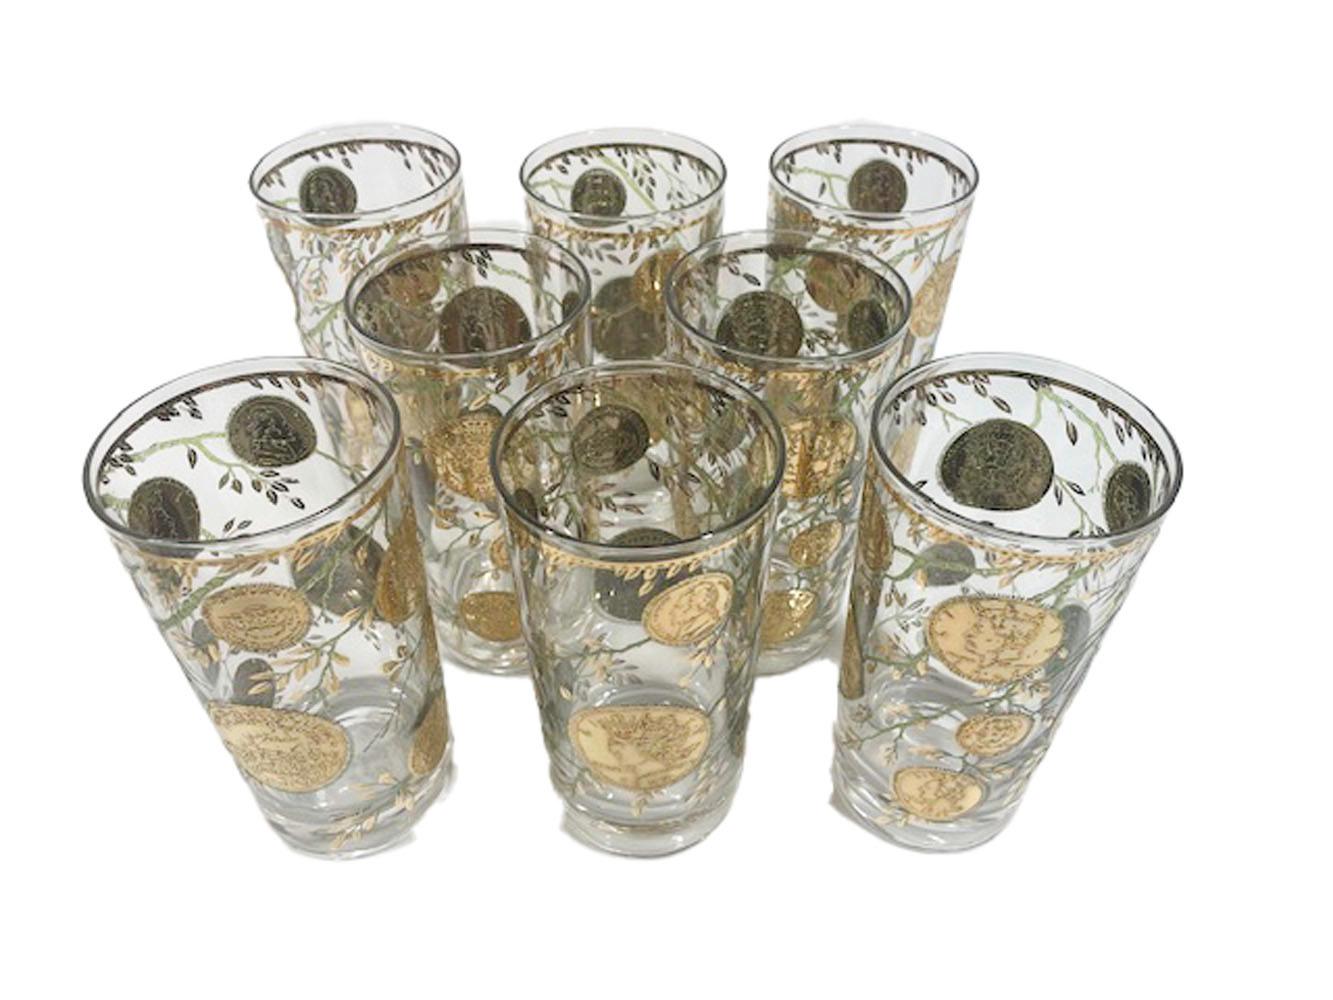 Eight vintage highball glasses by Culver, LTD. in the gold version of the 'Midas' pattern. Decorated with 22 karat gold American coins (obverse and reverse) on branches of raised translucent green enamel with gold leaves.